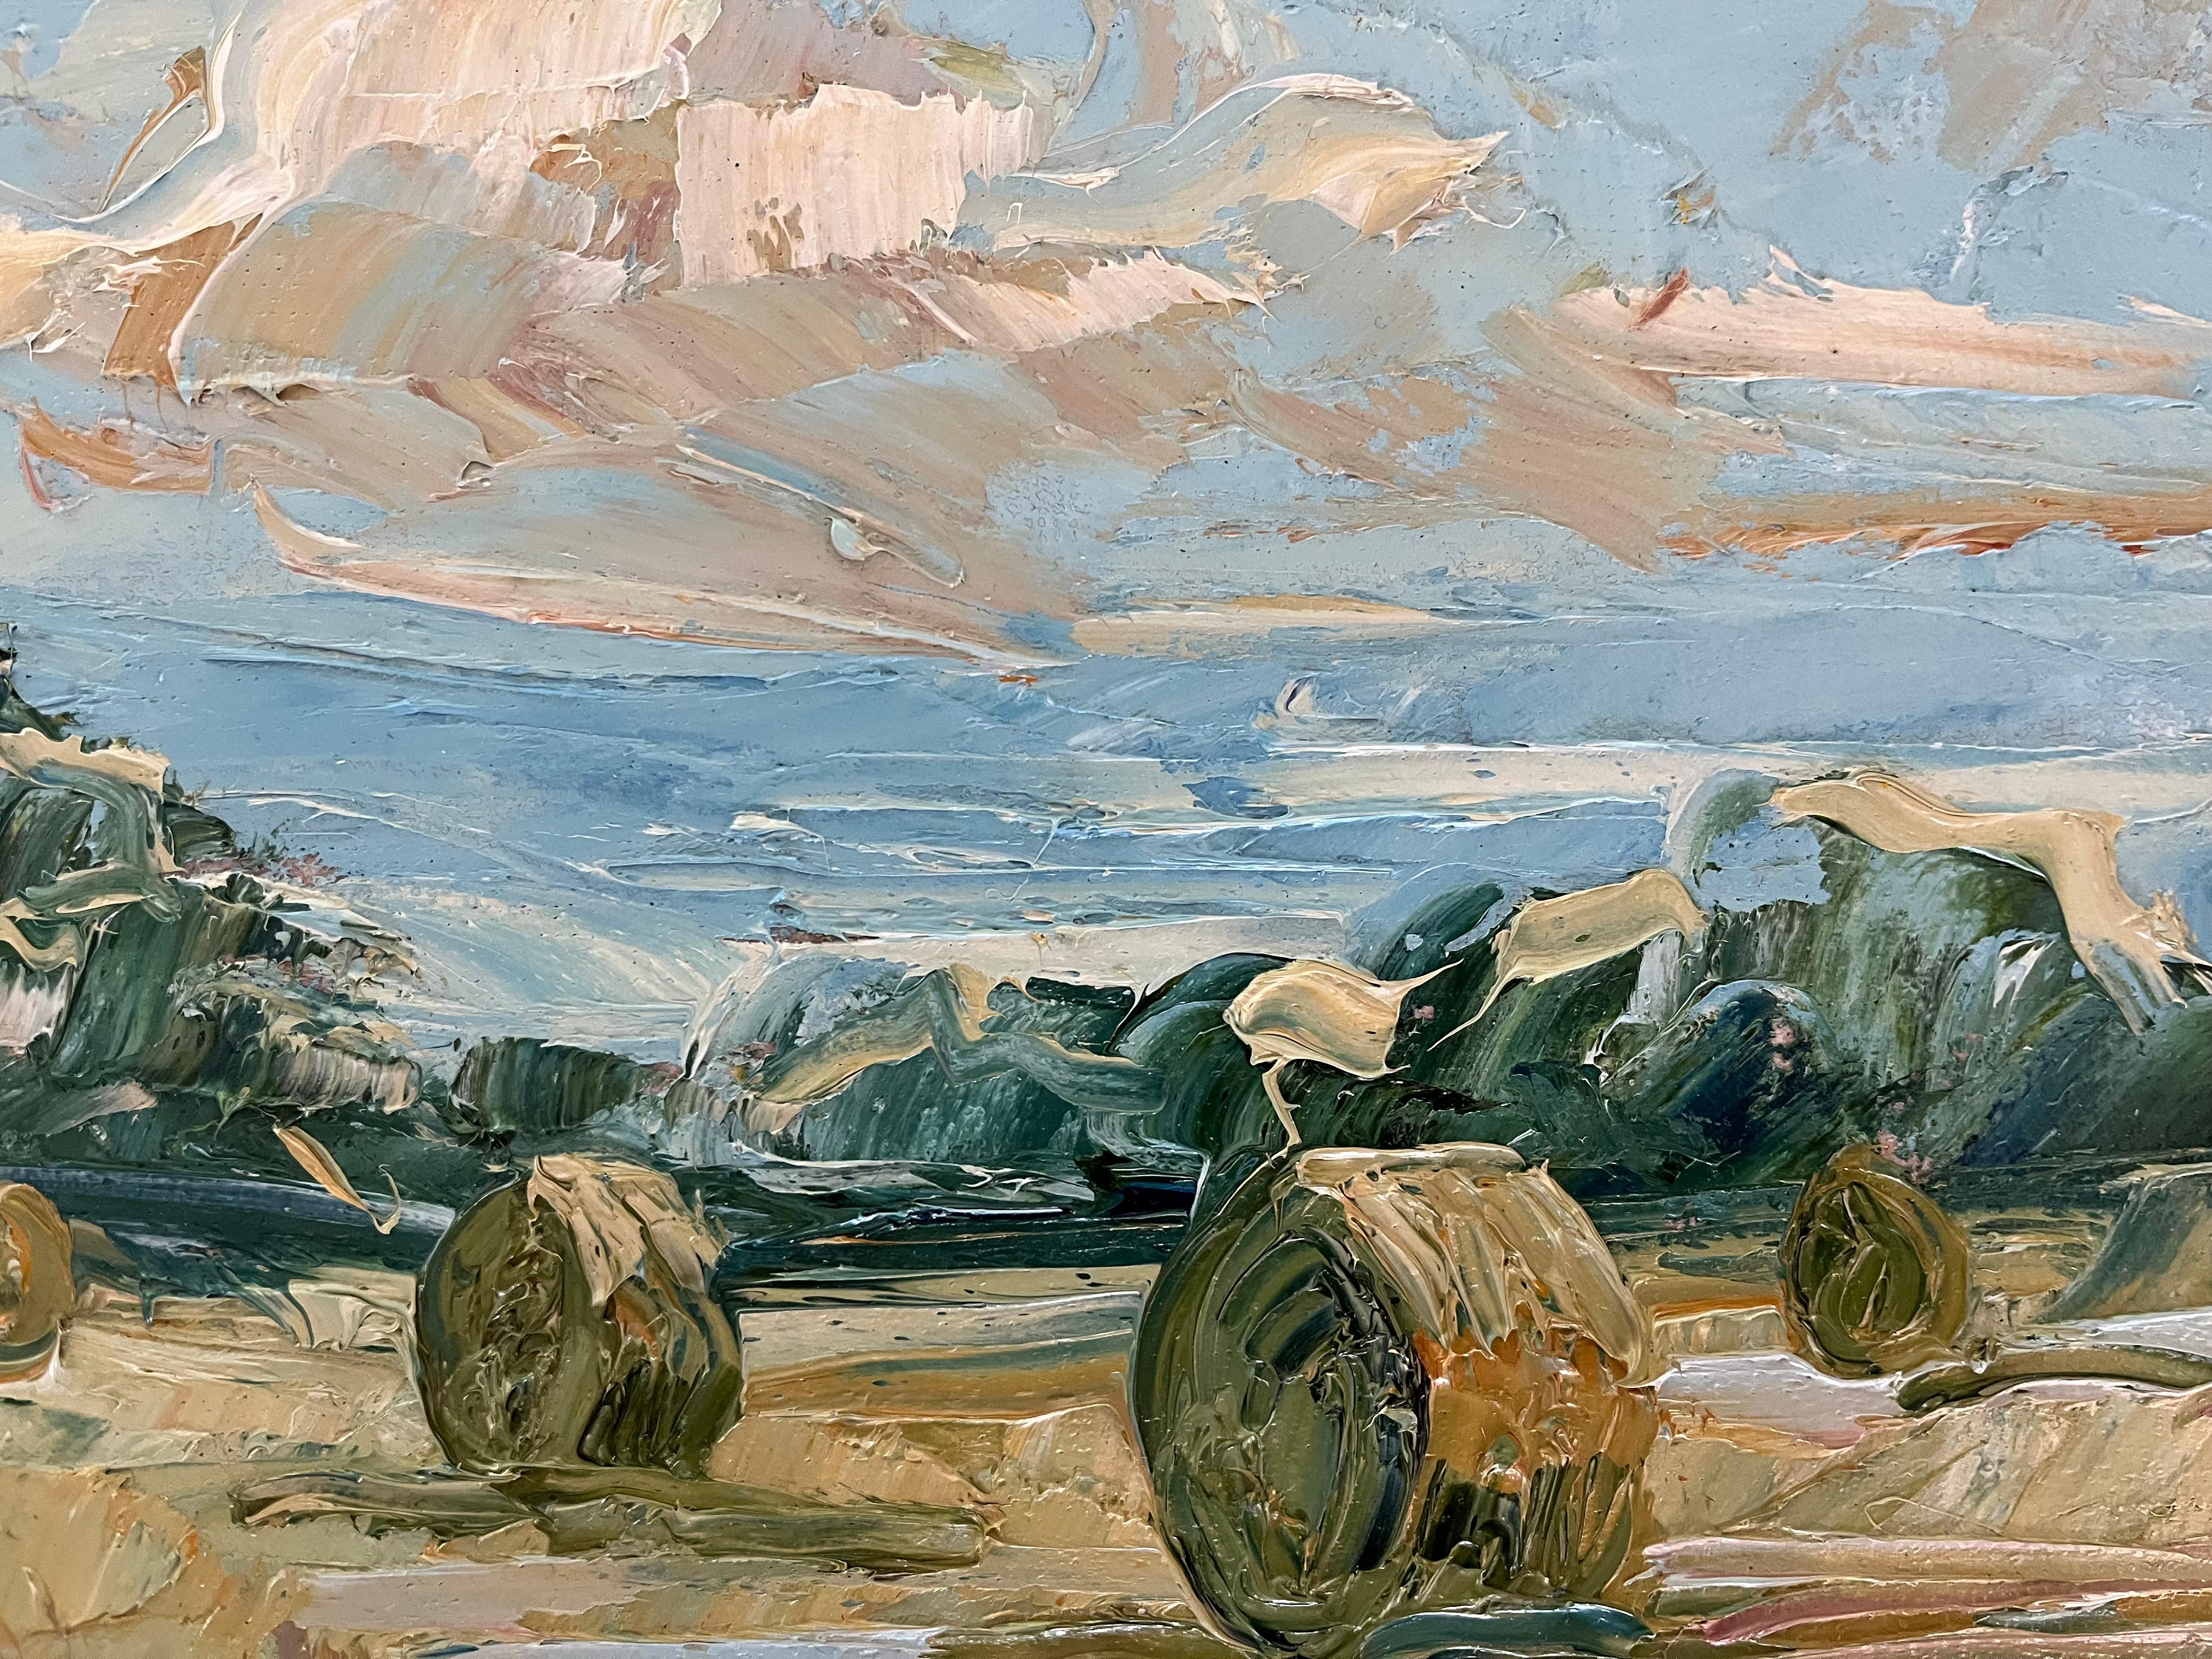 Summer bales on the Cotswolds Additional information: Oil on Board Sold framed  

Additional information:
Oil Paint on Board
27 H x 33 W x 3 D cm (10.63 x 12.99 x 1.18 in)
Sold framed

Image size: 
Height: 24cm (9.45 in) 
Width: 30cm (11.81